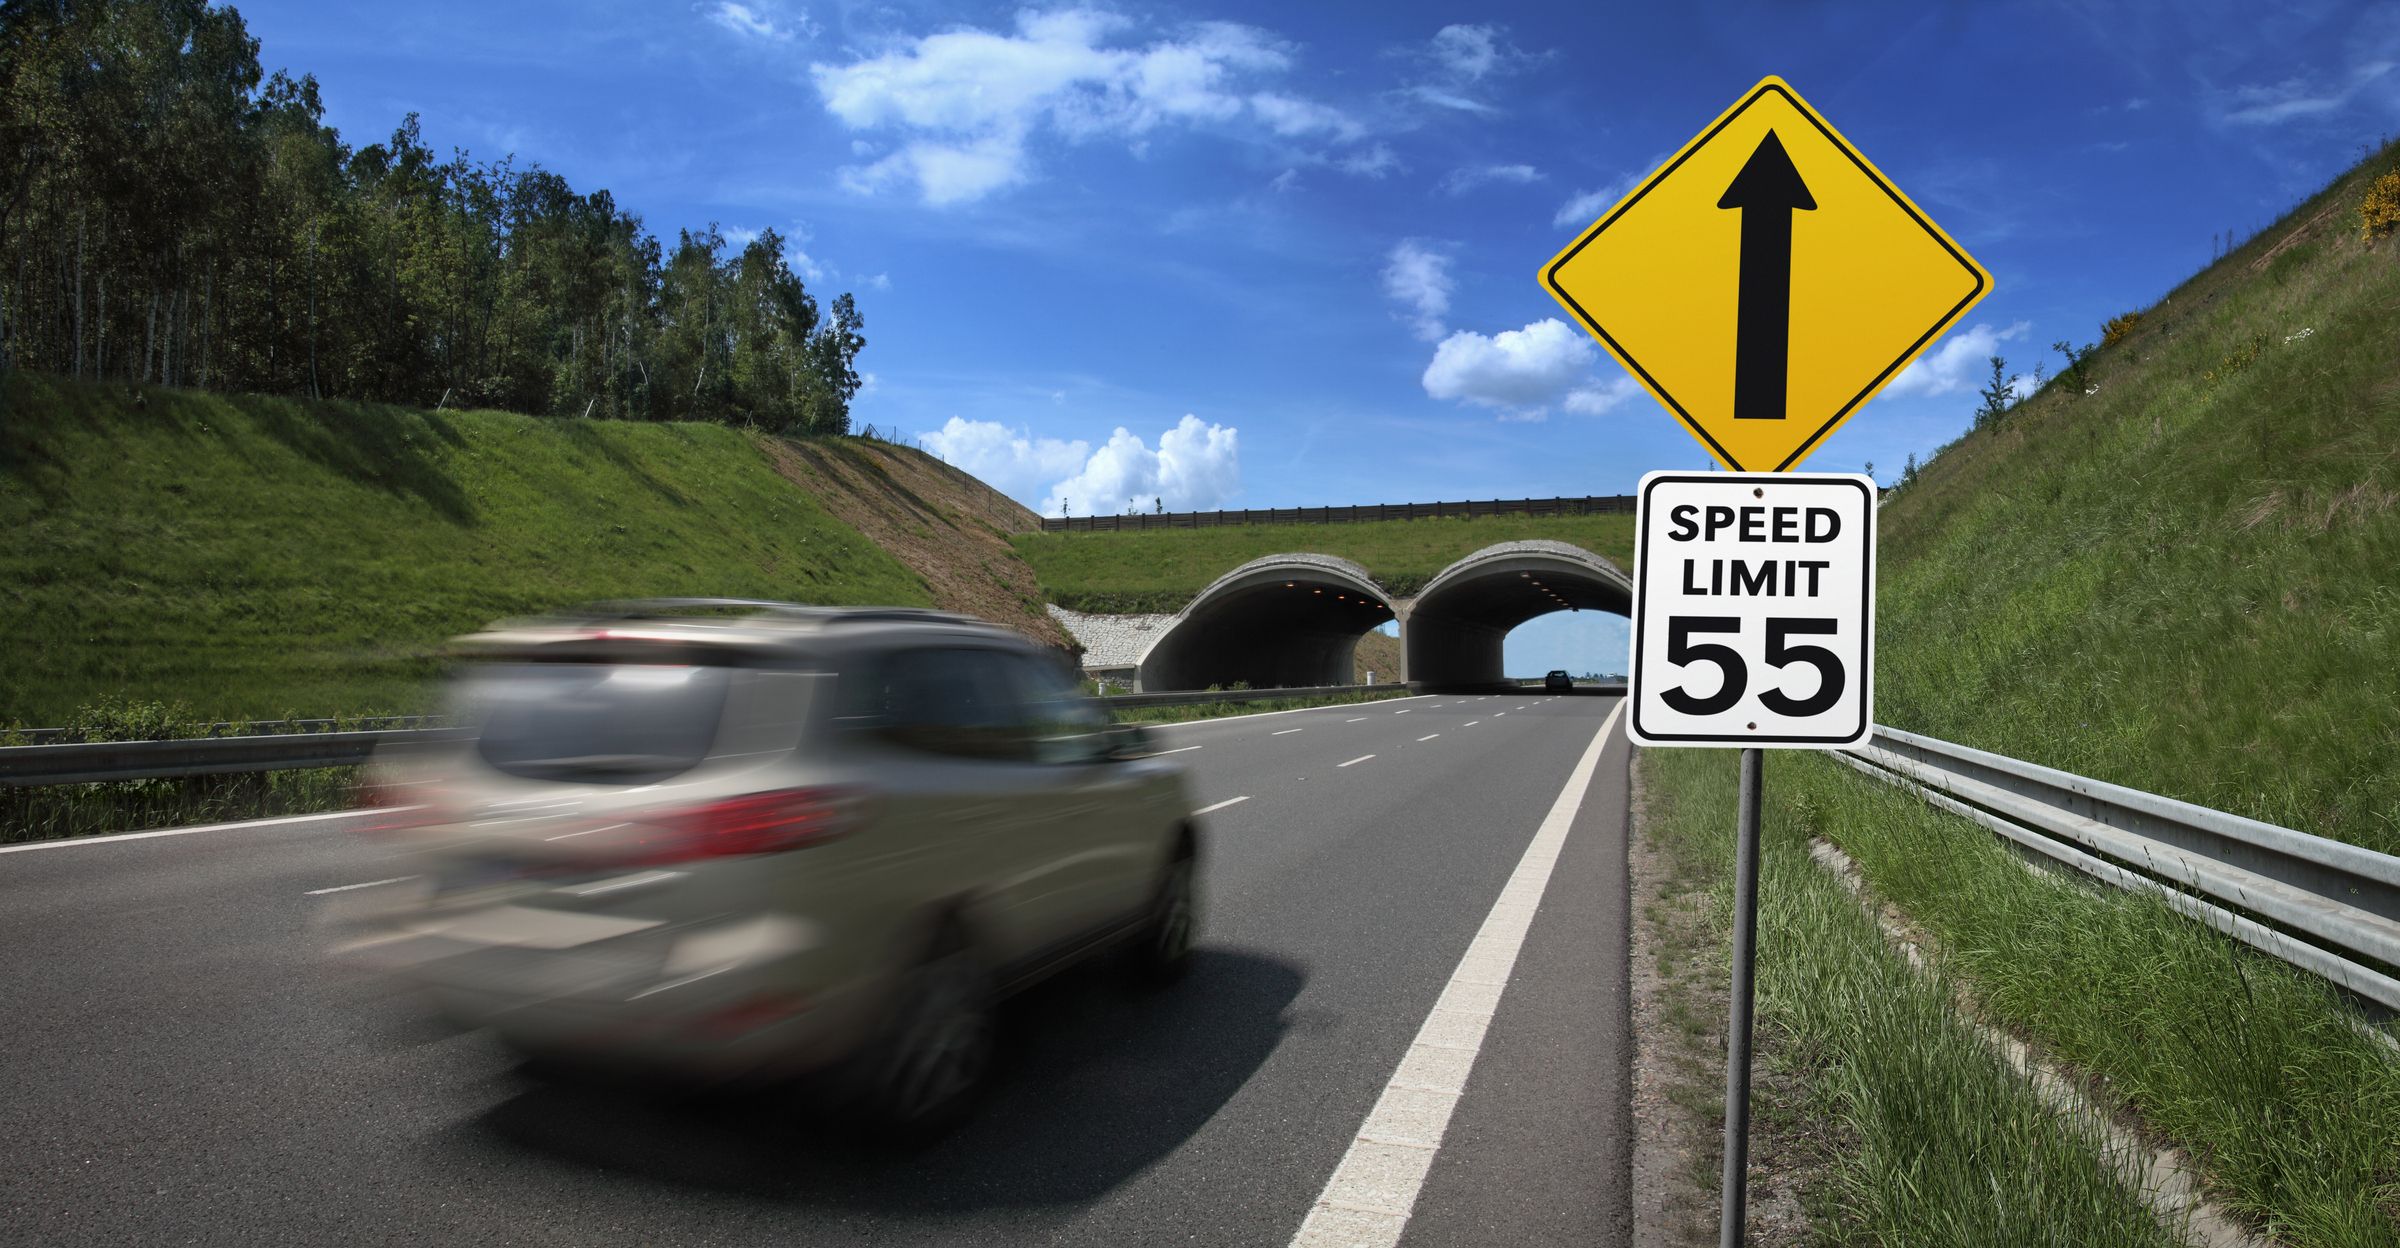 California's Bold Move: Passive Speed Limiters to Be Mandatory in New Cars by 2032